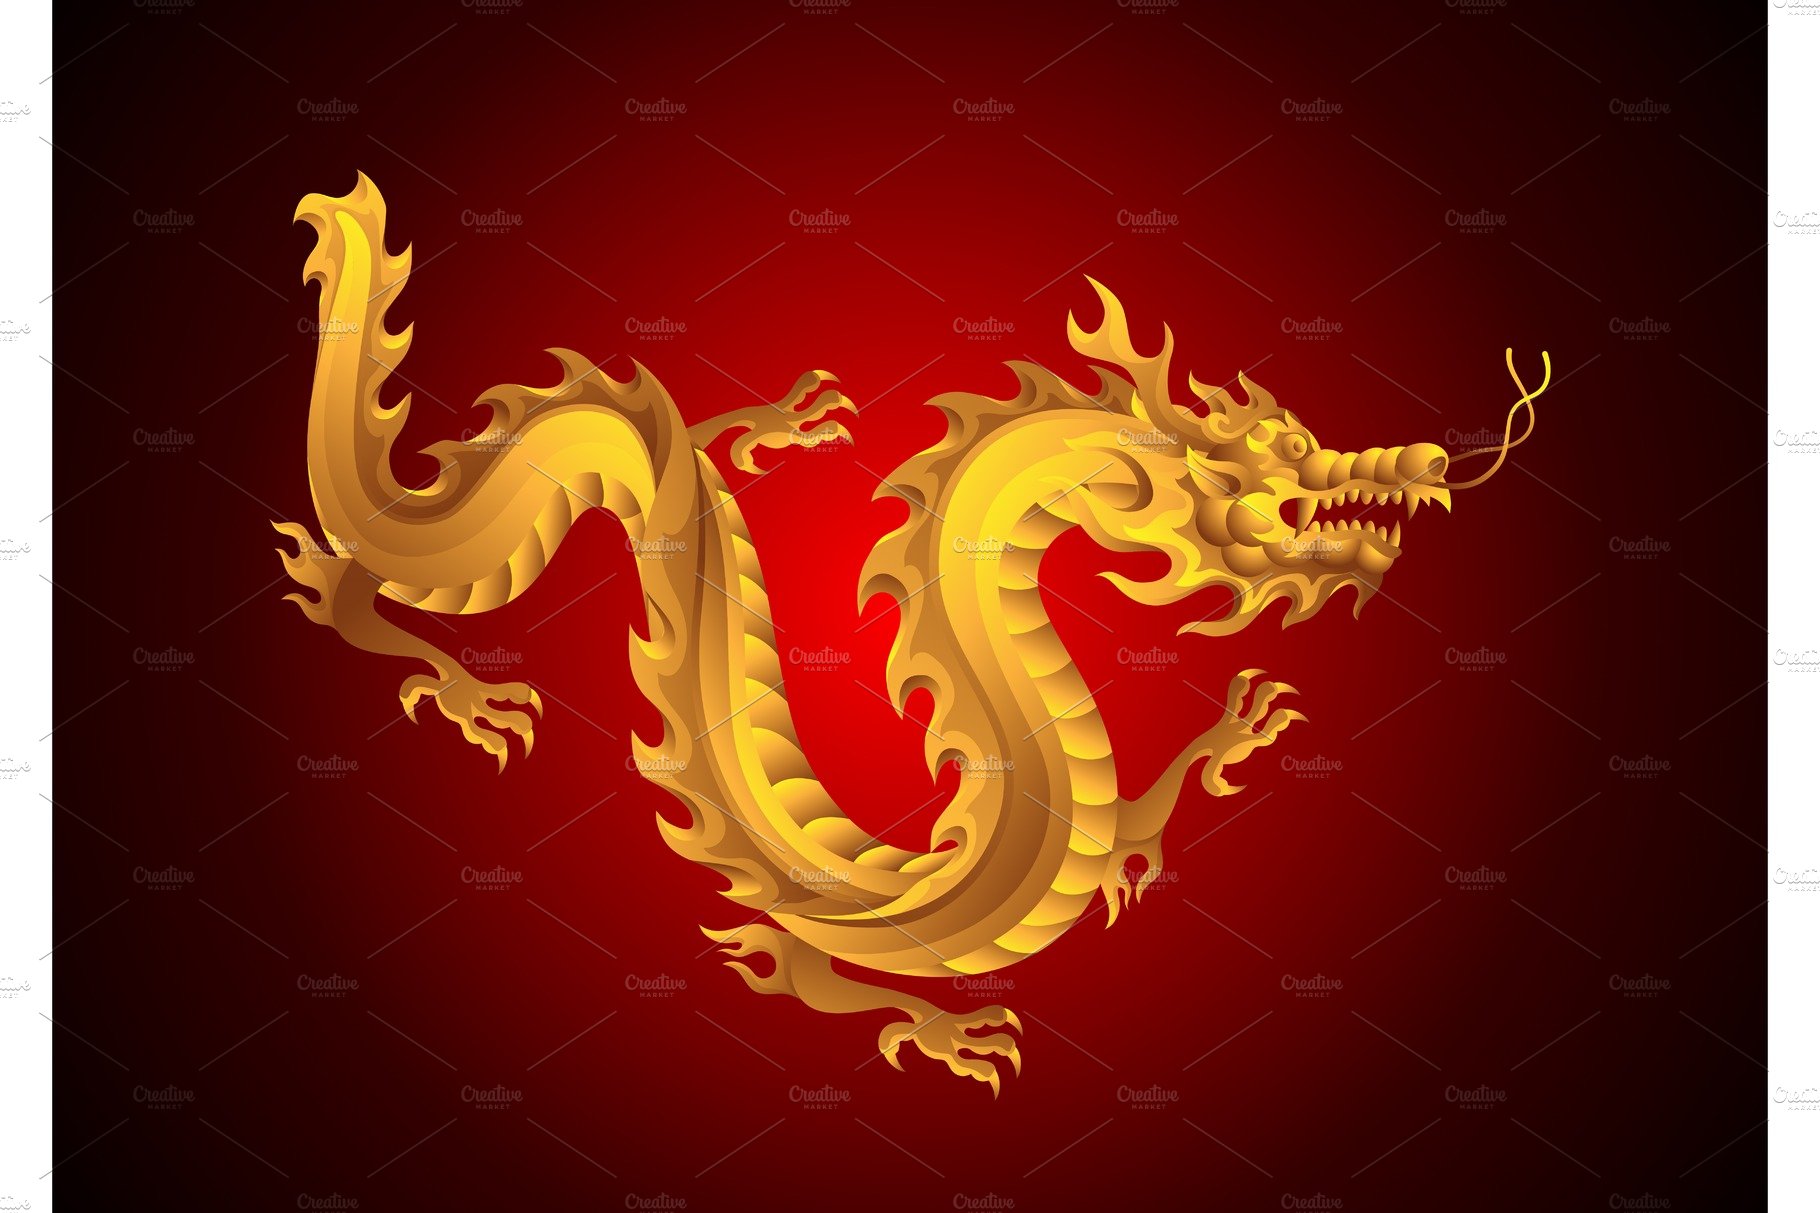 Illustration of Chinese dragon. cover image.